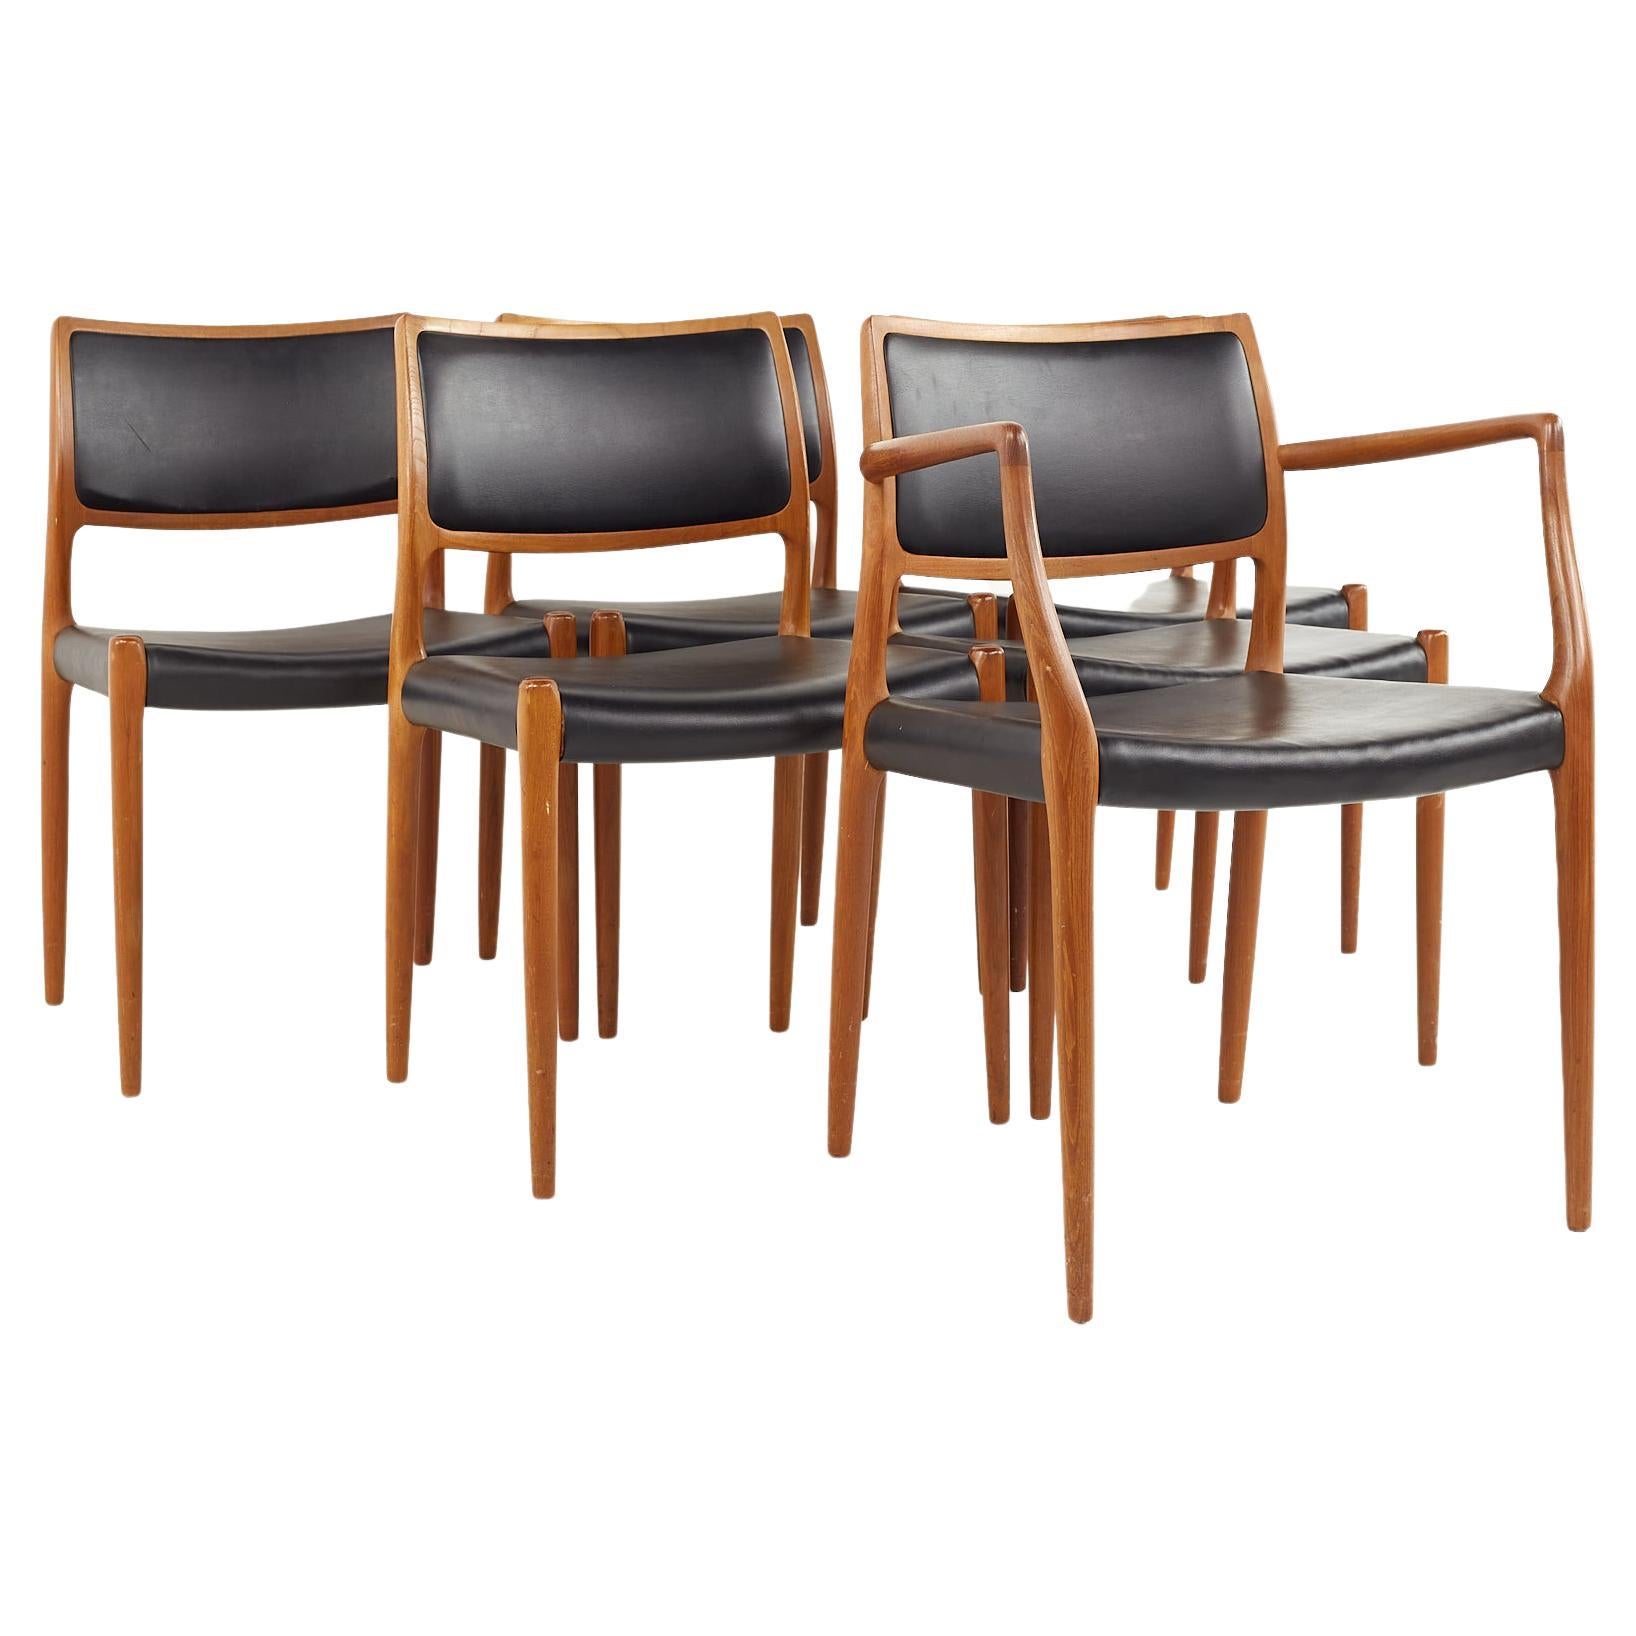 Niels Otto Moller for Jl Mollers Mid Century Danish Teak Dining Chairs, Set 6